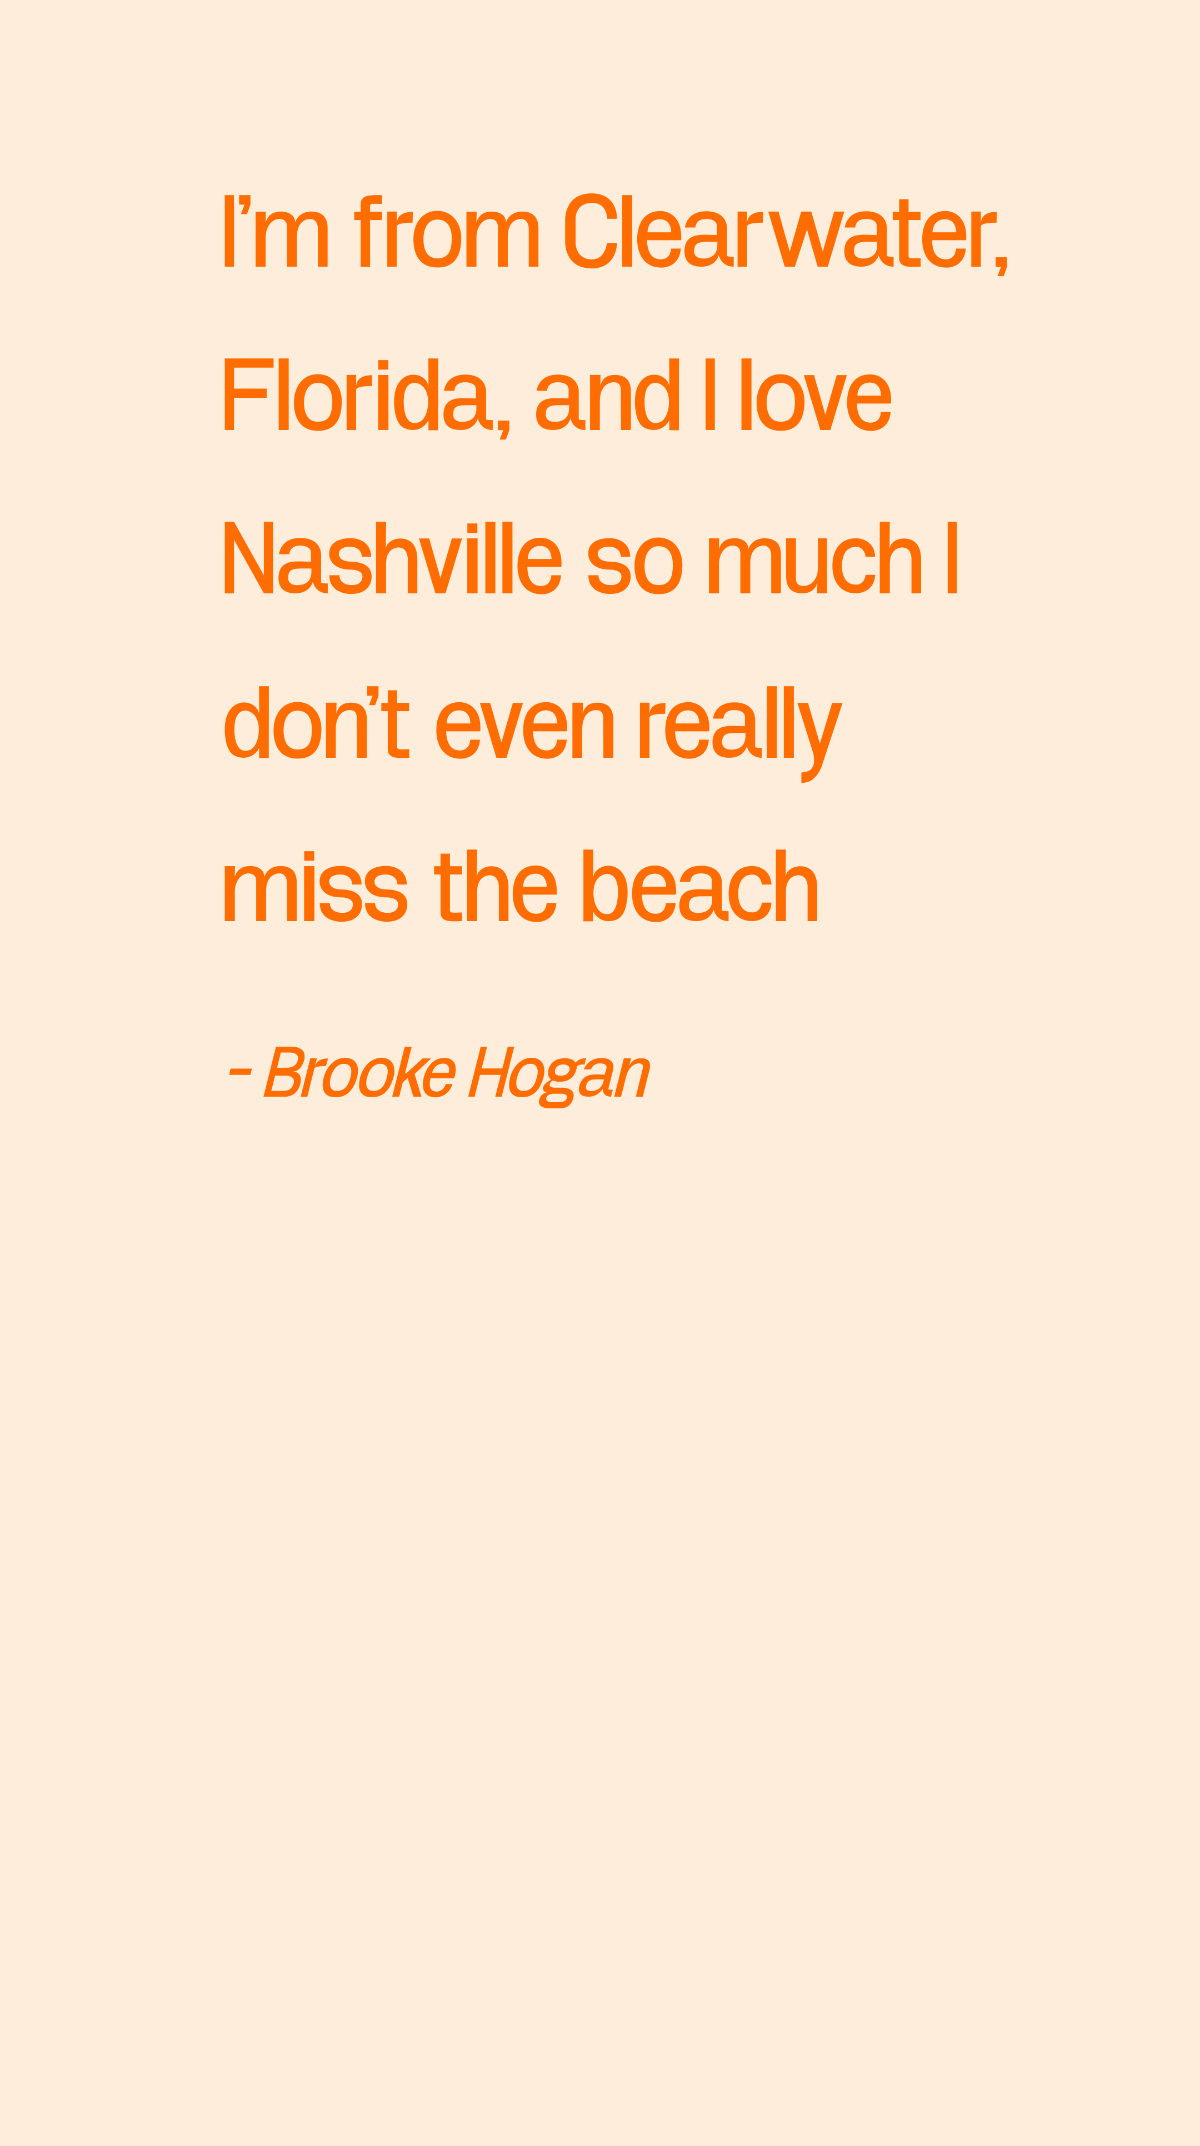 Brooke Hogan - I'm from Clearwater, Florida, and I love Nashville so much I don't even really miss the beach